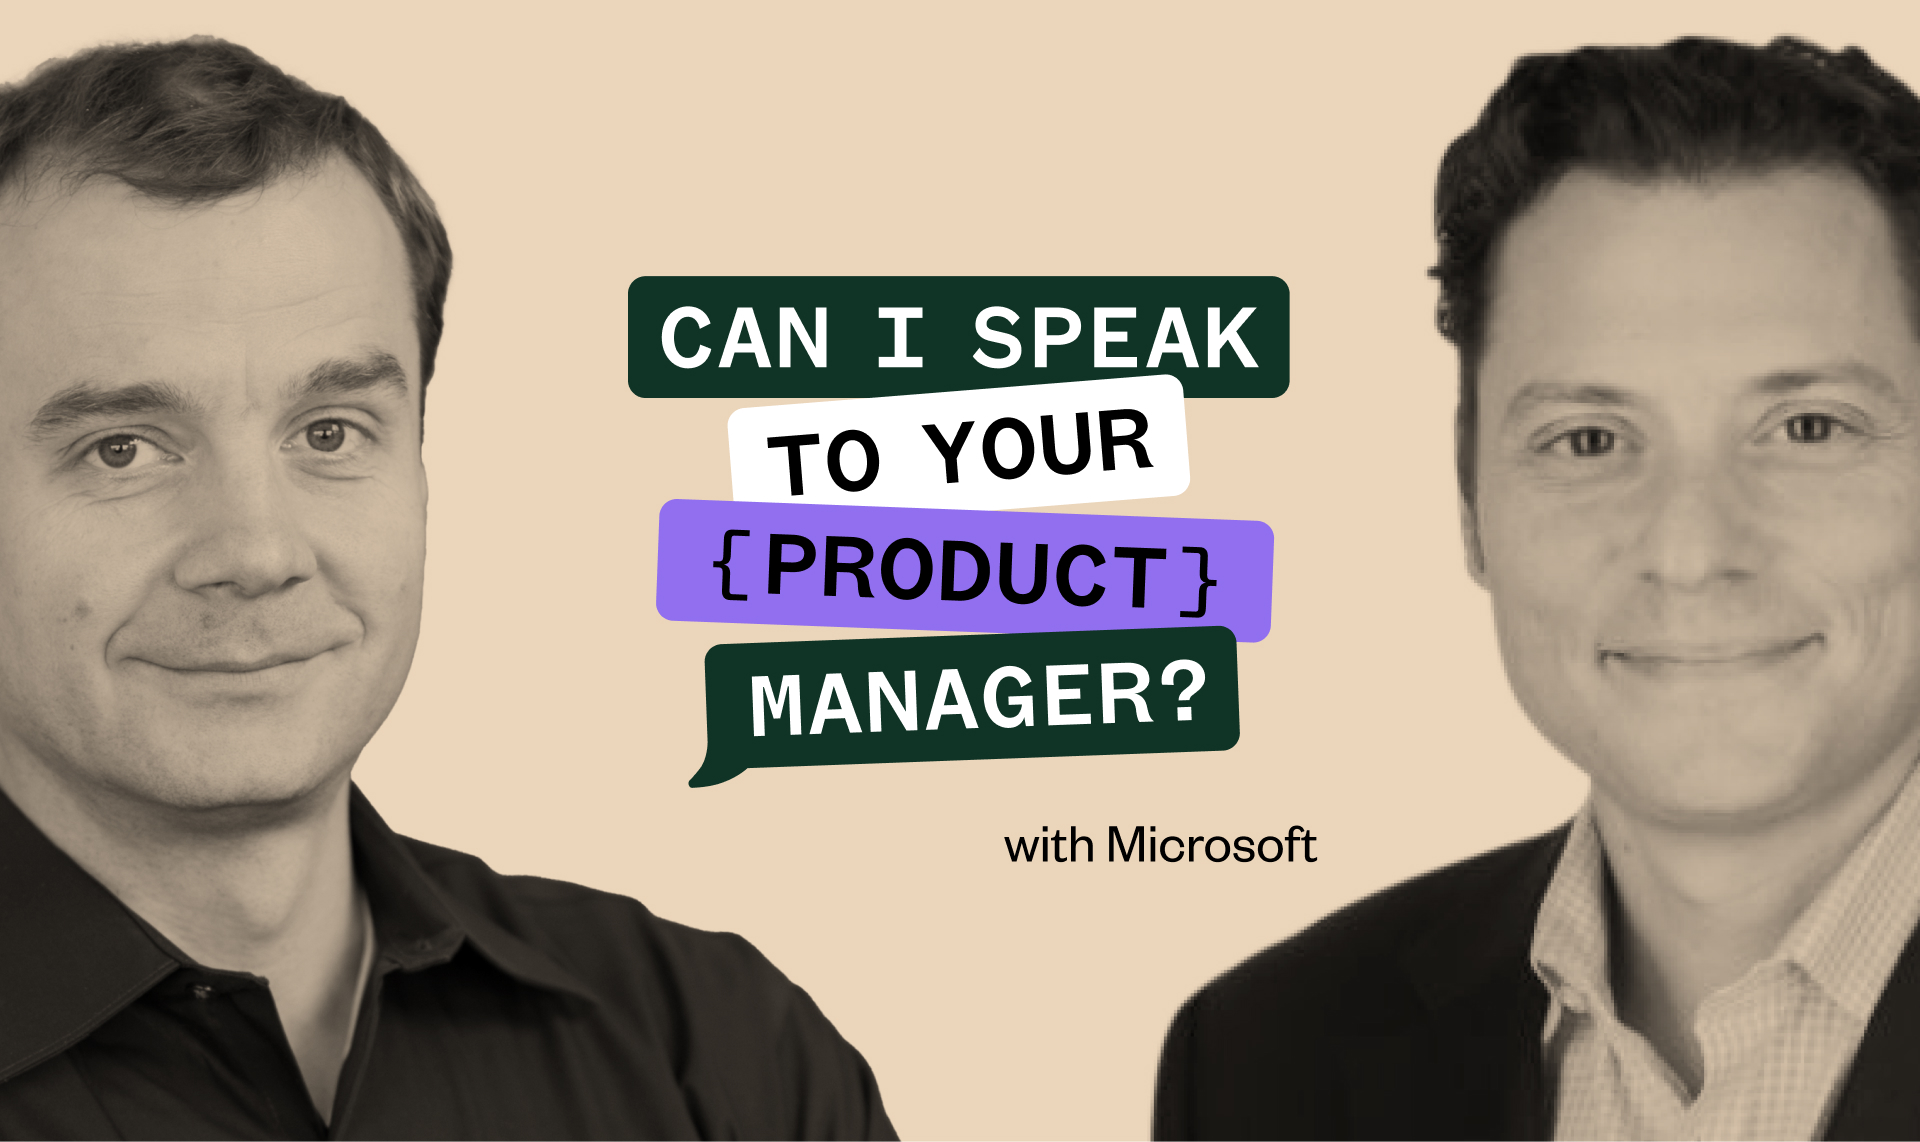 Two men are pictured on either side of the text "Can I Speak to Your {Product} Manager?" with Microsoft.